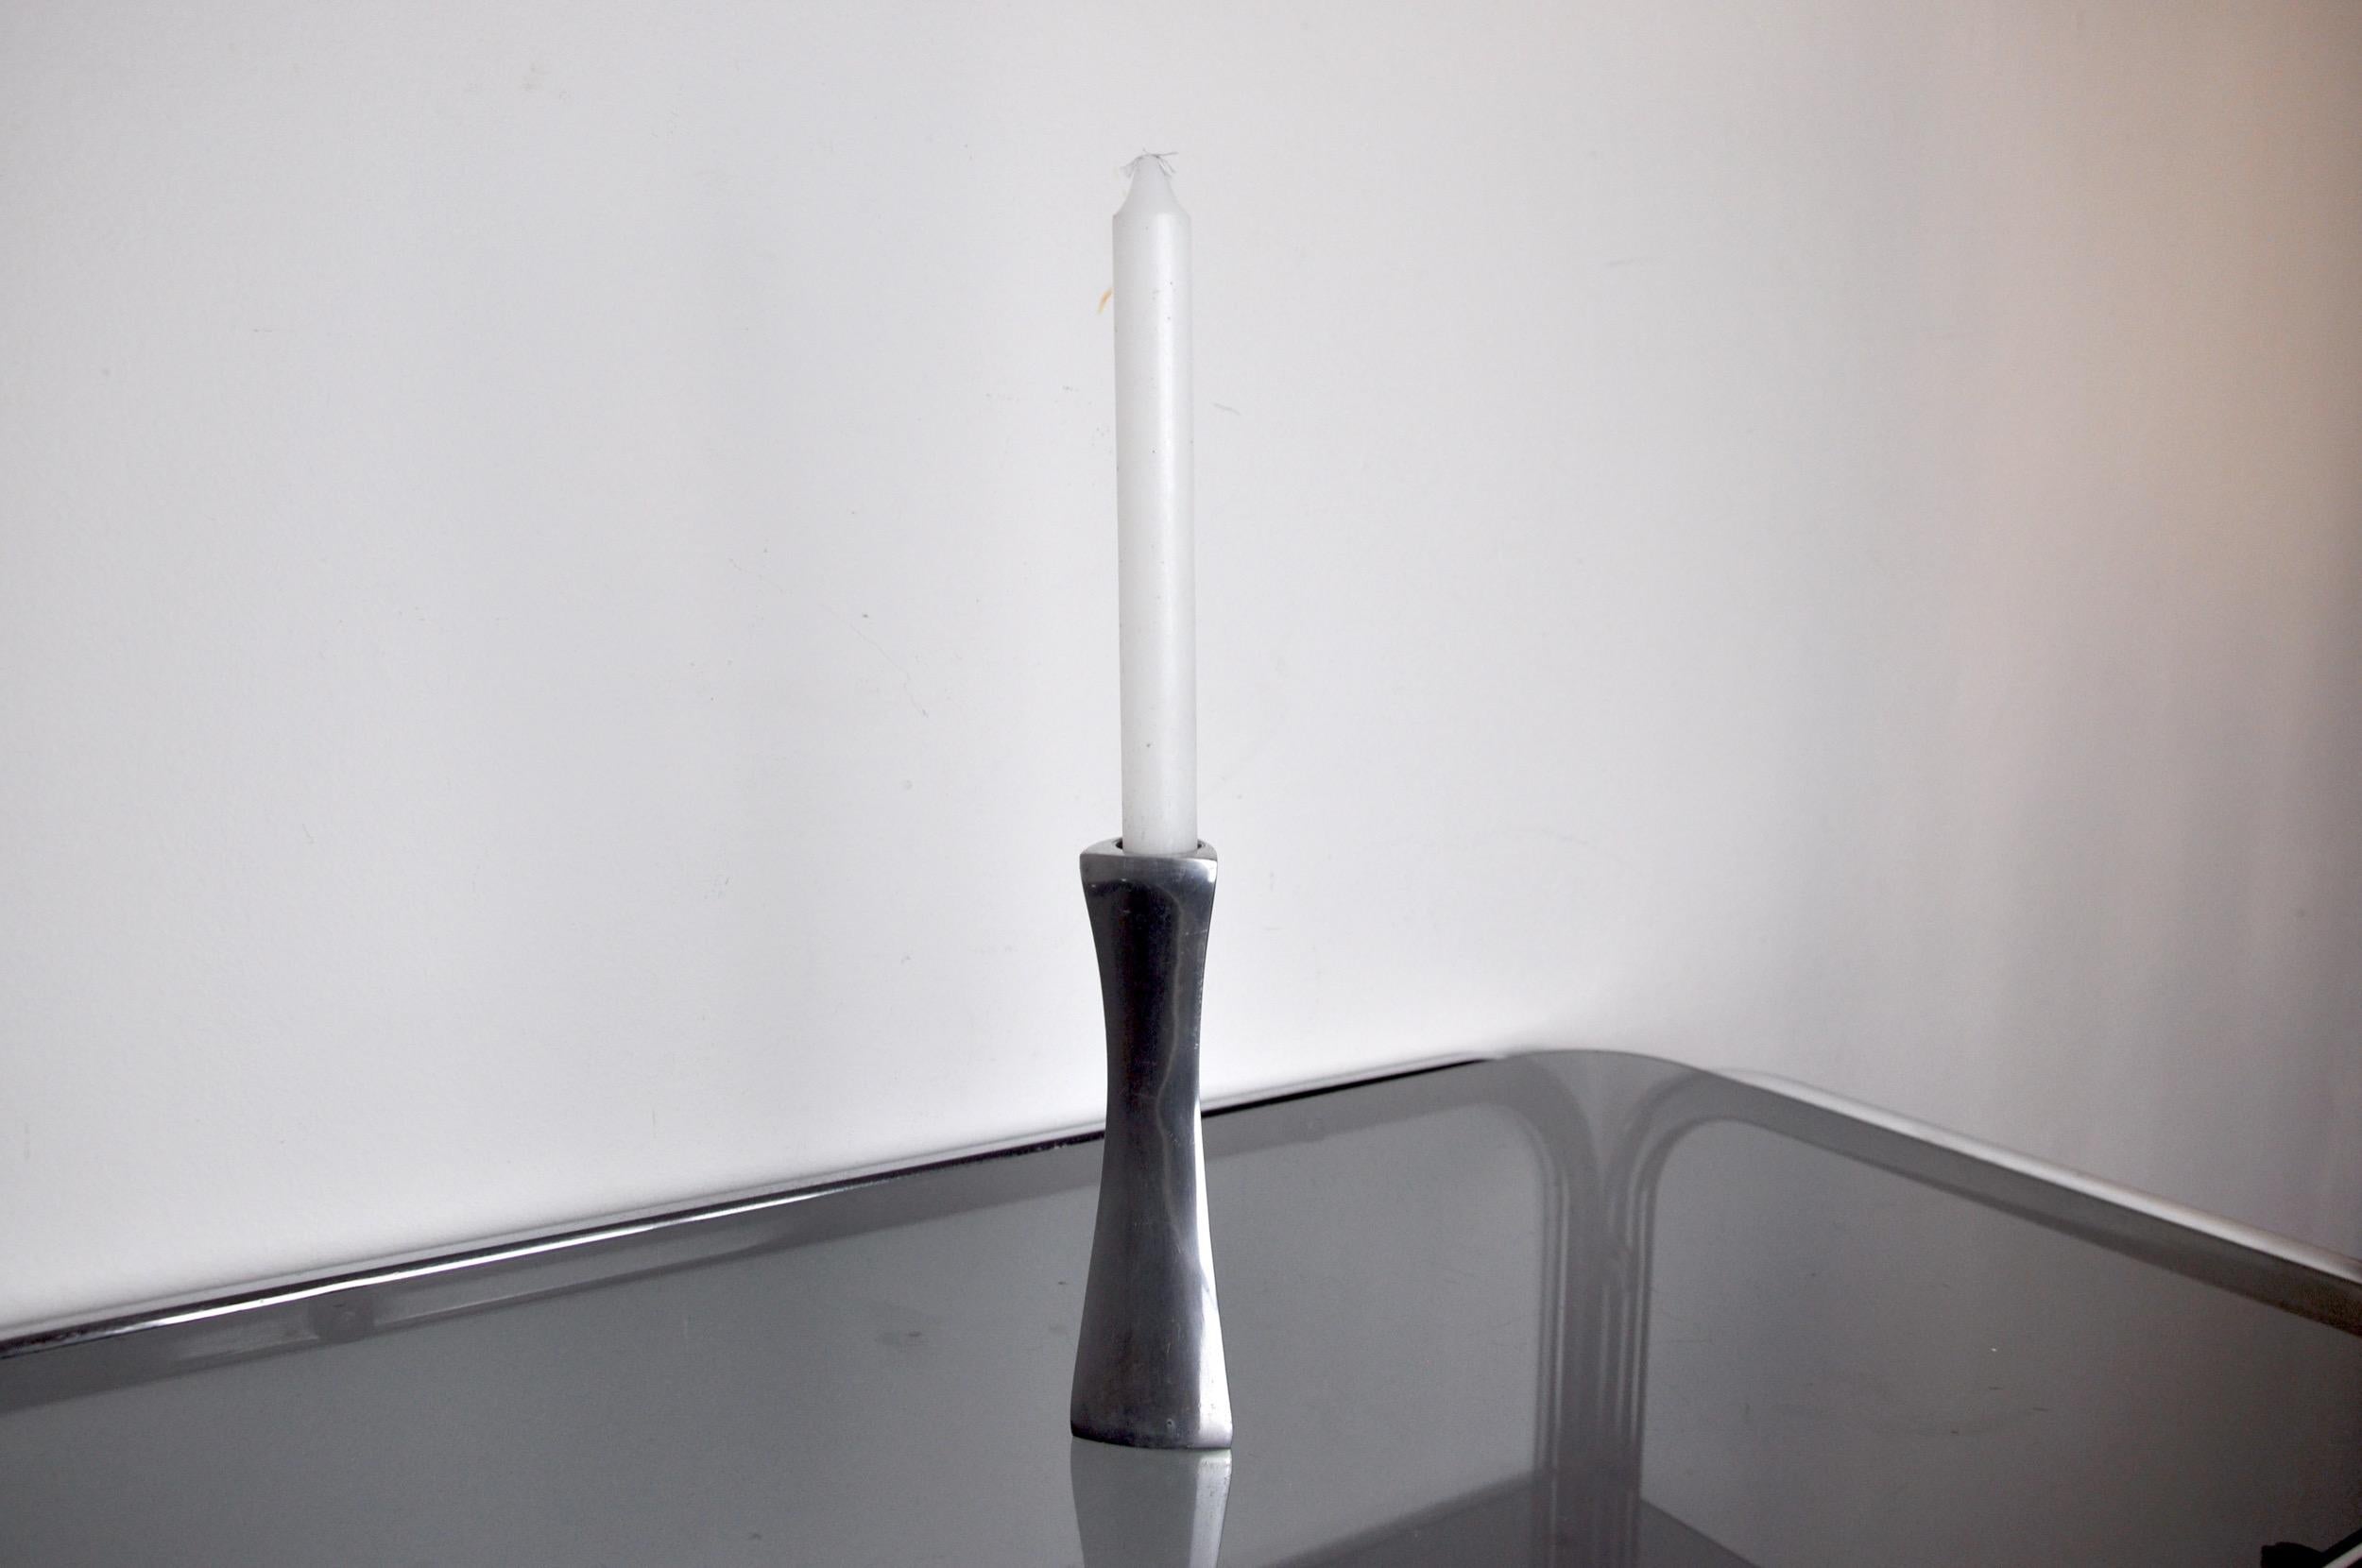 Very beautiful brutalist candle holder designed and produced by art3 spain in spain in the 1970s.

Triangular structures in solid aluminum.

Unique objects that will decorate wonderfully and bring a real design touch to your interior.

Ref: